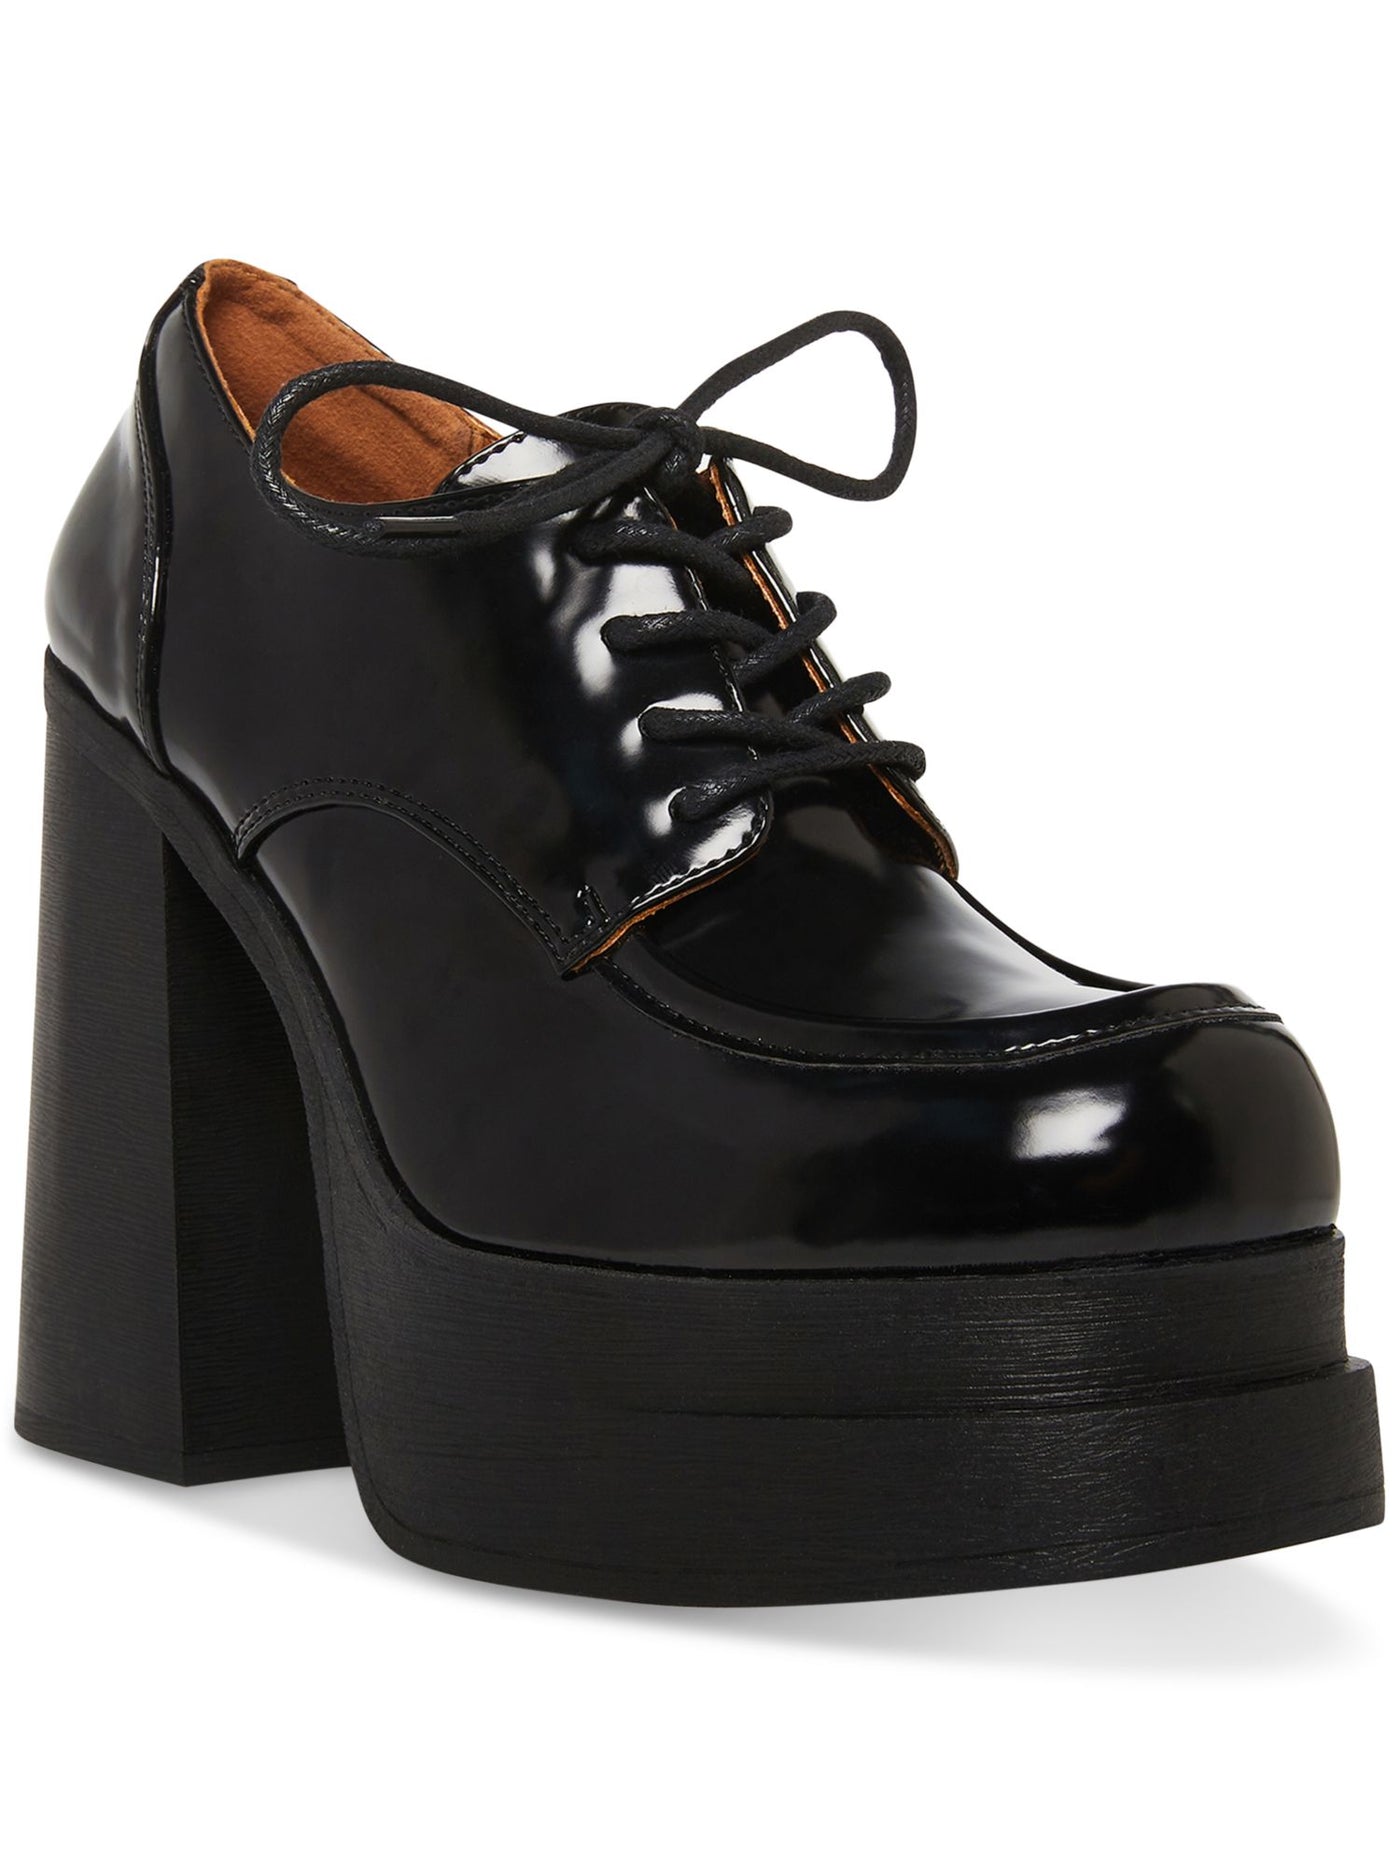 MADDEN GIRL Womens Black 1-1/2" Platform Cushioned Drummen Square Toe Lace-Up Oxfored Heels 8.5 M